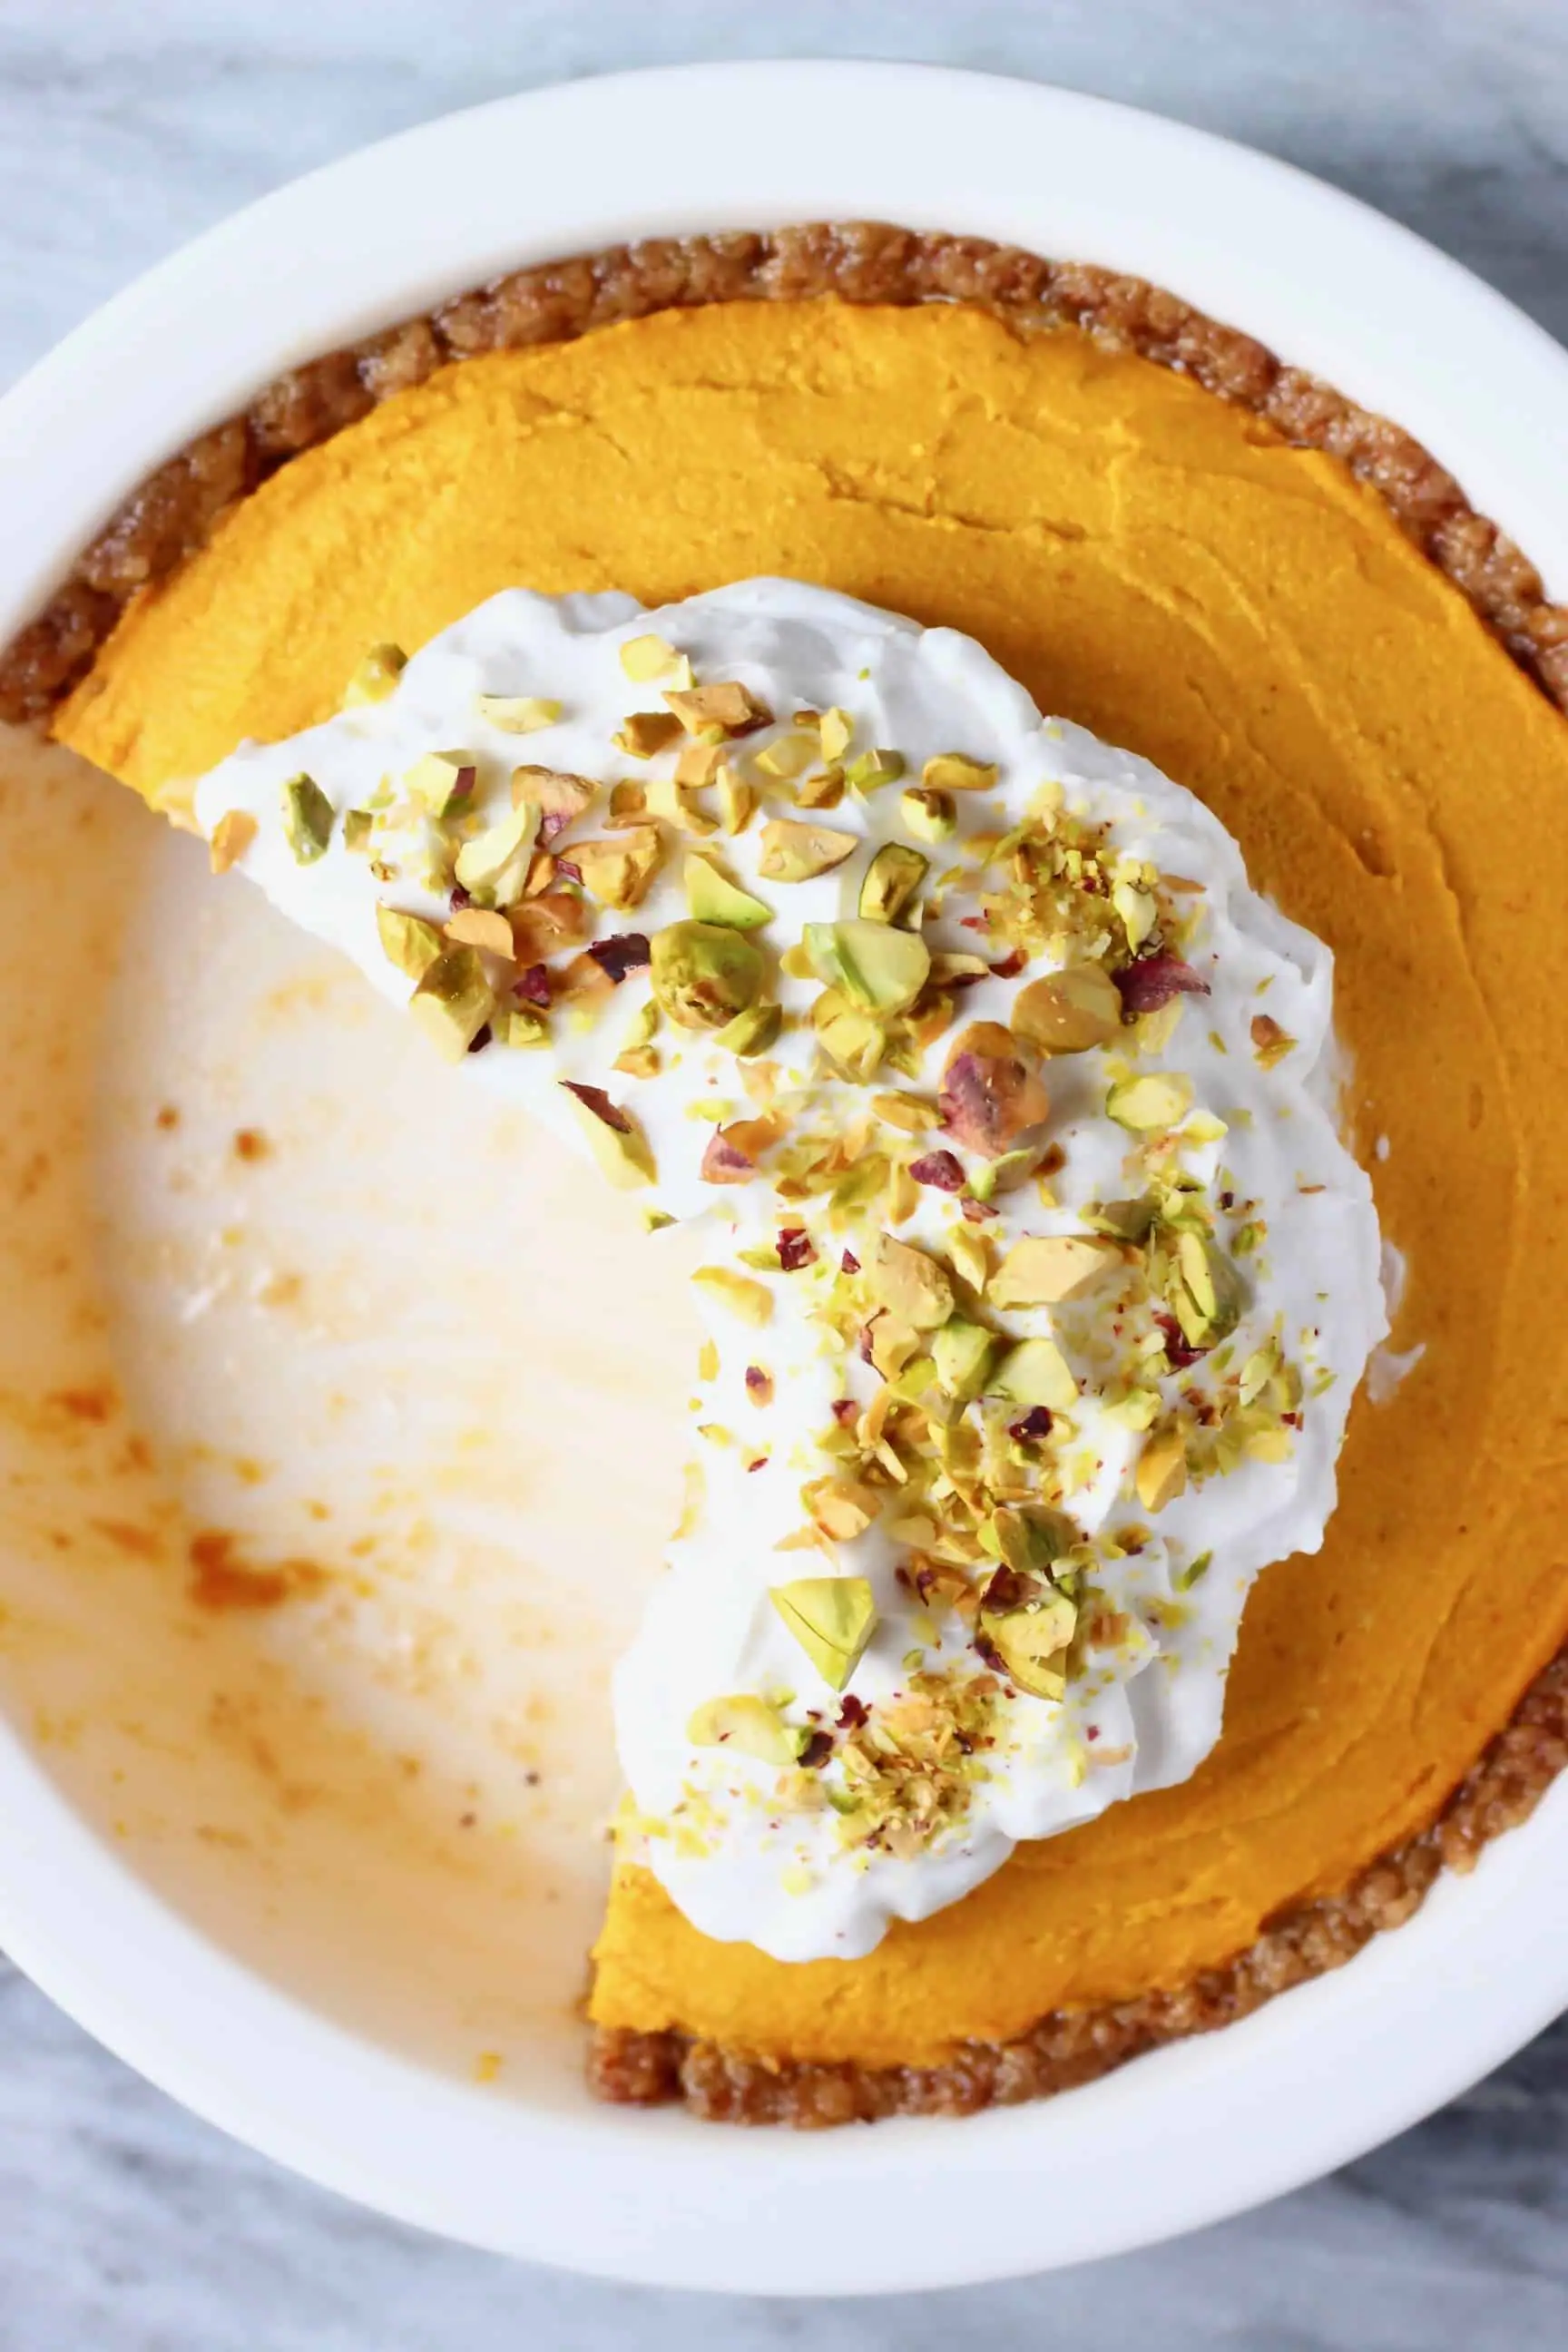 No-bake vegan pumpkin pie topped with whipped cream and chopped pistachios with a slice taken out of it in a white pie dish